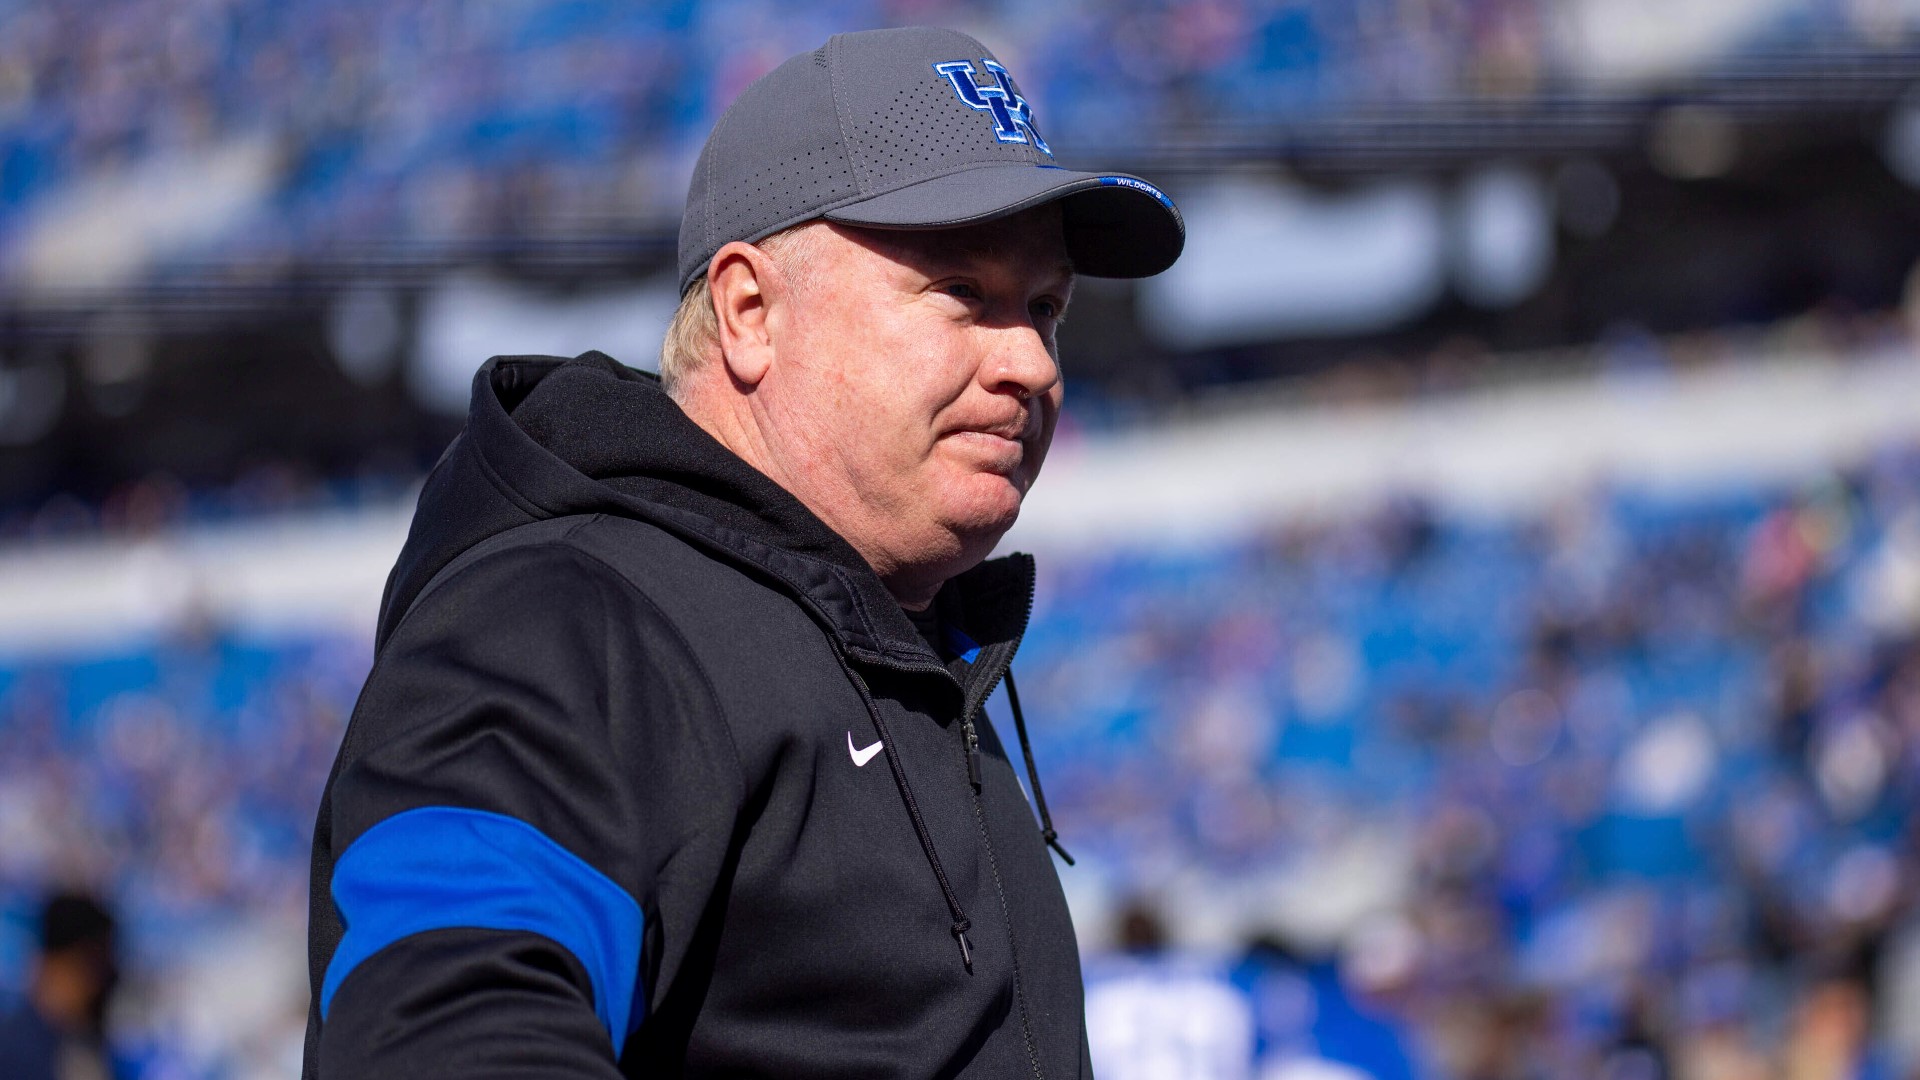 Mark Stoops said he likes Jeff Brohm and thinks he will "do a really good job" at the University of Louisville.